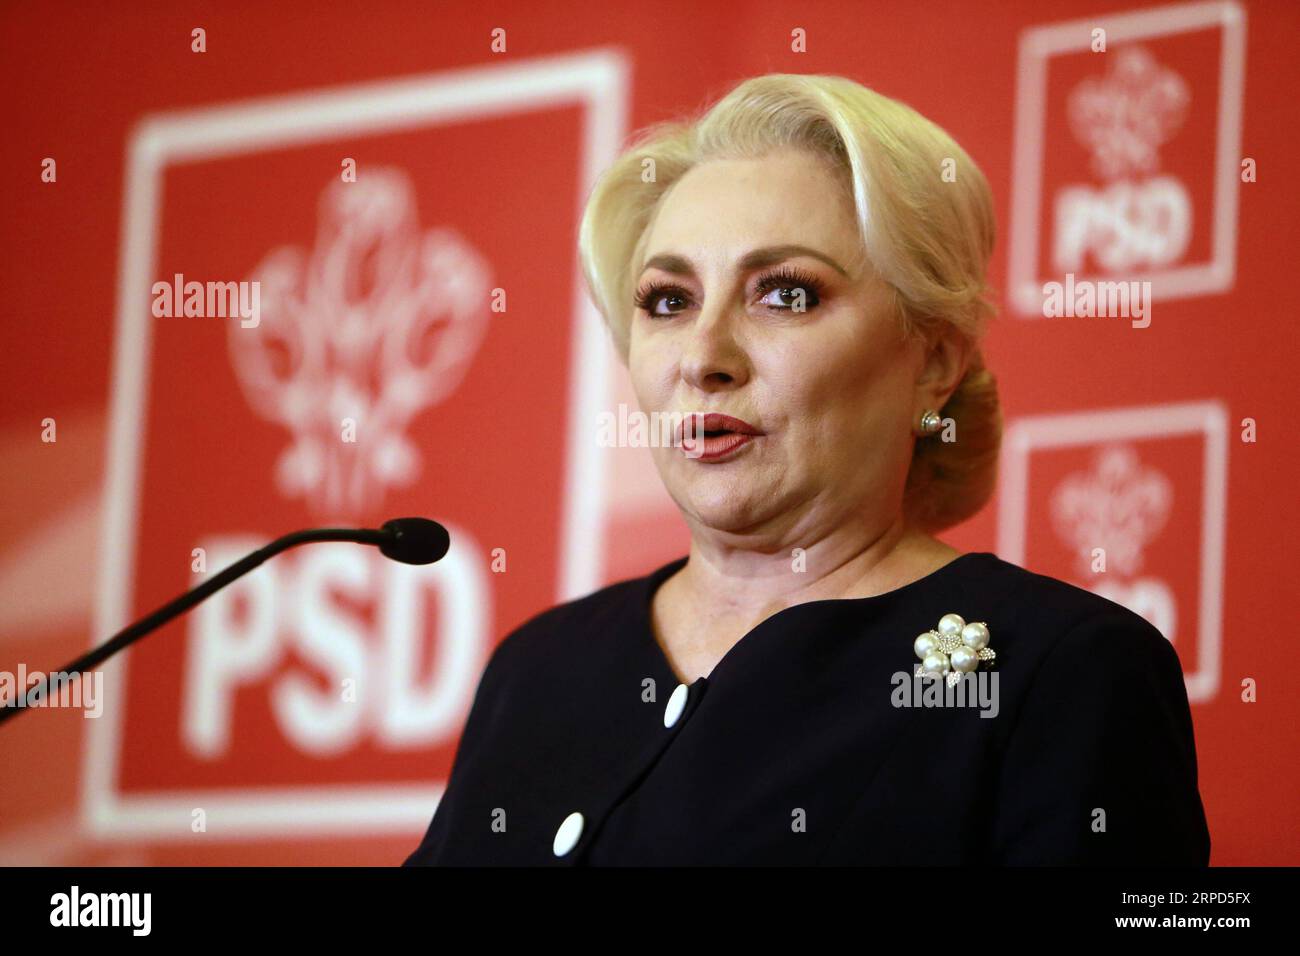 190723 -- BUCHAREST, July 23, 2019 Xinhua -- Romanian Prime Minister Viorica Dancila addresses journalists after being nominated as presidential candidatein Bucharest, capital of Romania, on July 23, 2019. Romania s main ruling Social Democratic Party on Tuesday named its national leader and incumbent prime minister Viorica Dancila as presidential candidate for the upcoming election in late autumn. Xinhua/Cristian Cristel ROMANIA-BUCHAREST-PM-PRESIDENTIAL CANDIDATE-NOMINATION PUBLICATIONxNOTxINxCHN Stock Photo